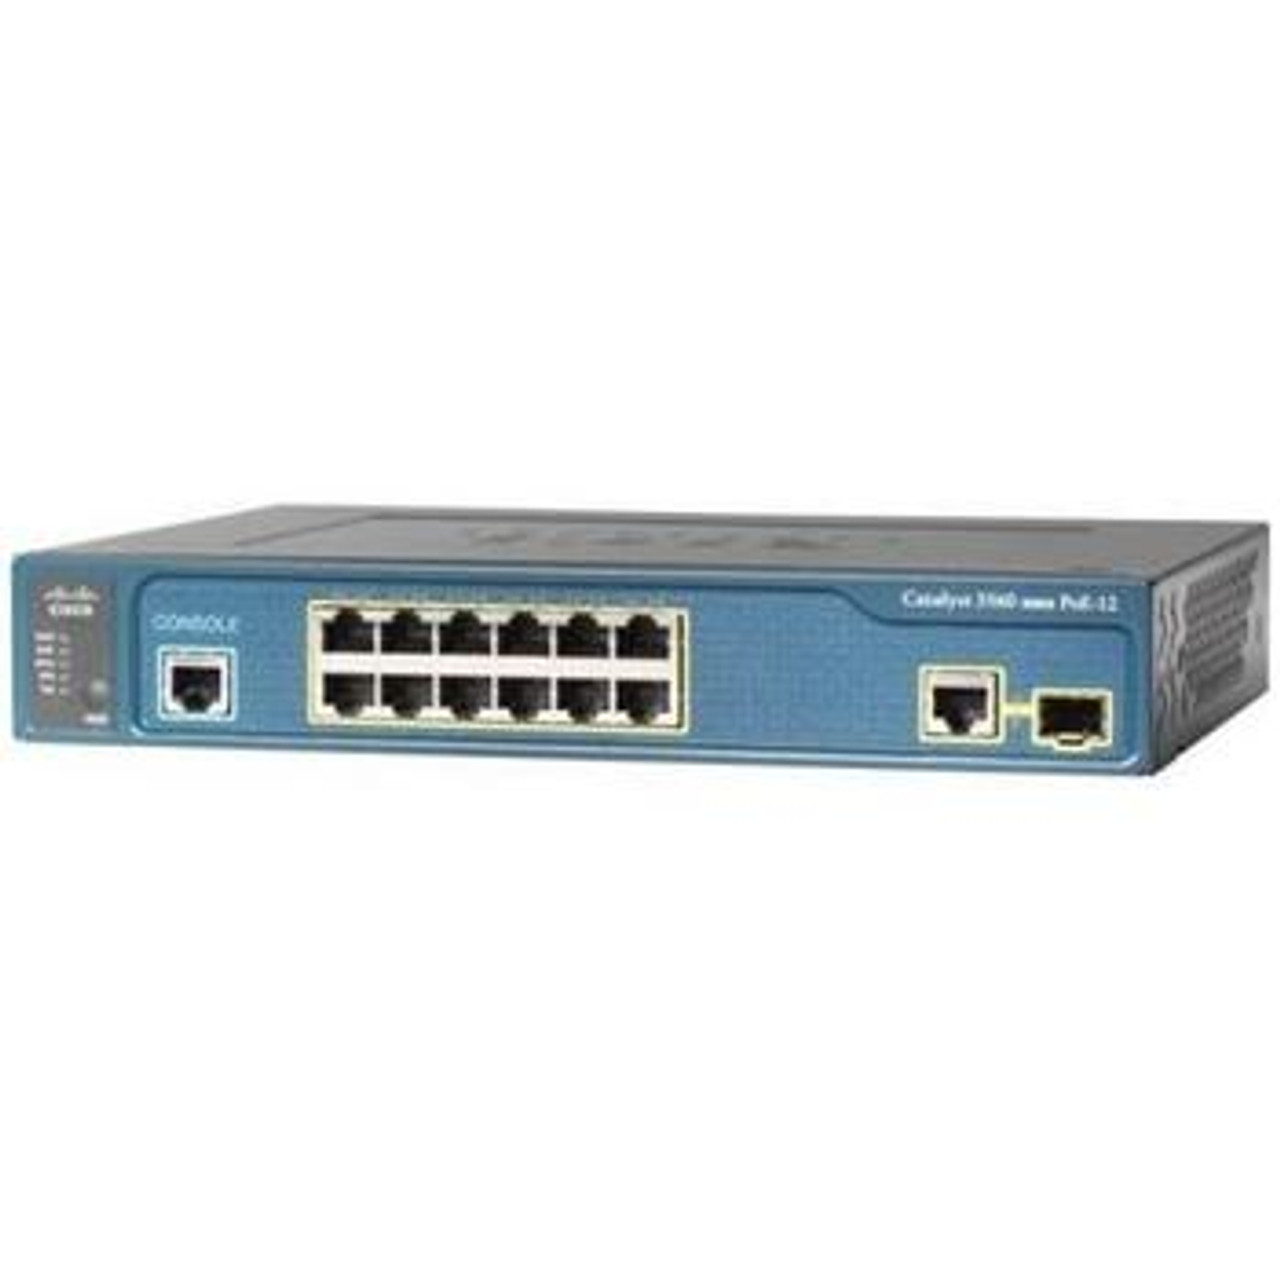 WS-C3560-12PC-S Cisco 12 Ethernet 10/100 Ports and 1 Dual-Purpose 10/100/1000 and SFP Port Catalyst Switch